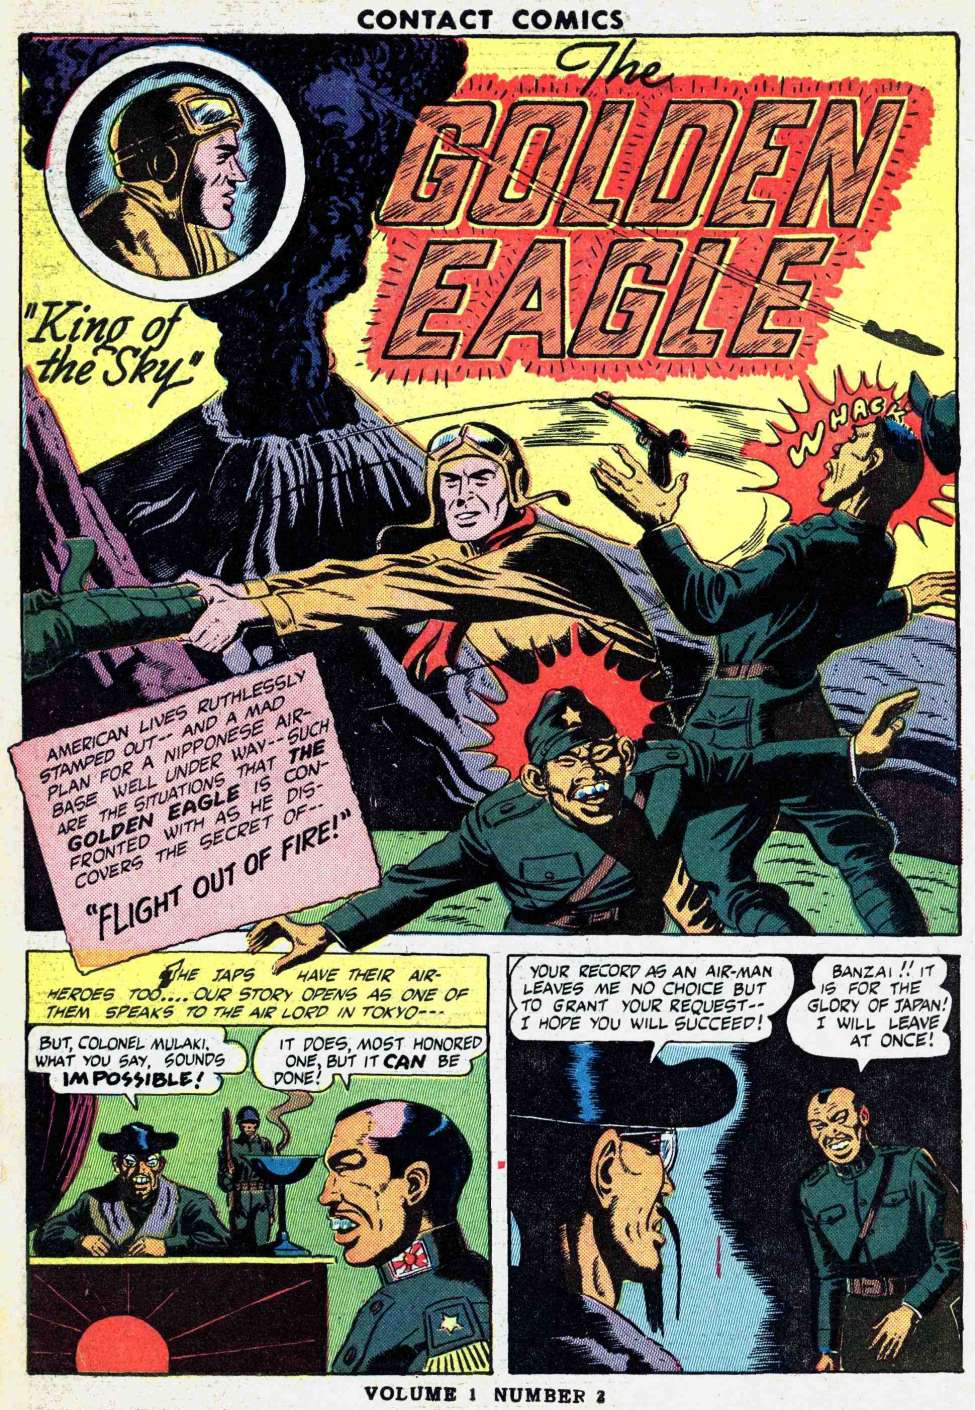 Comic Book Cover For Golden Eagle Archive (Contact Comics)